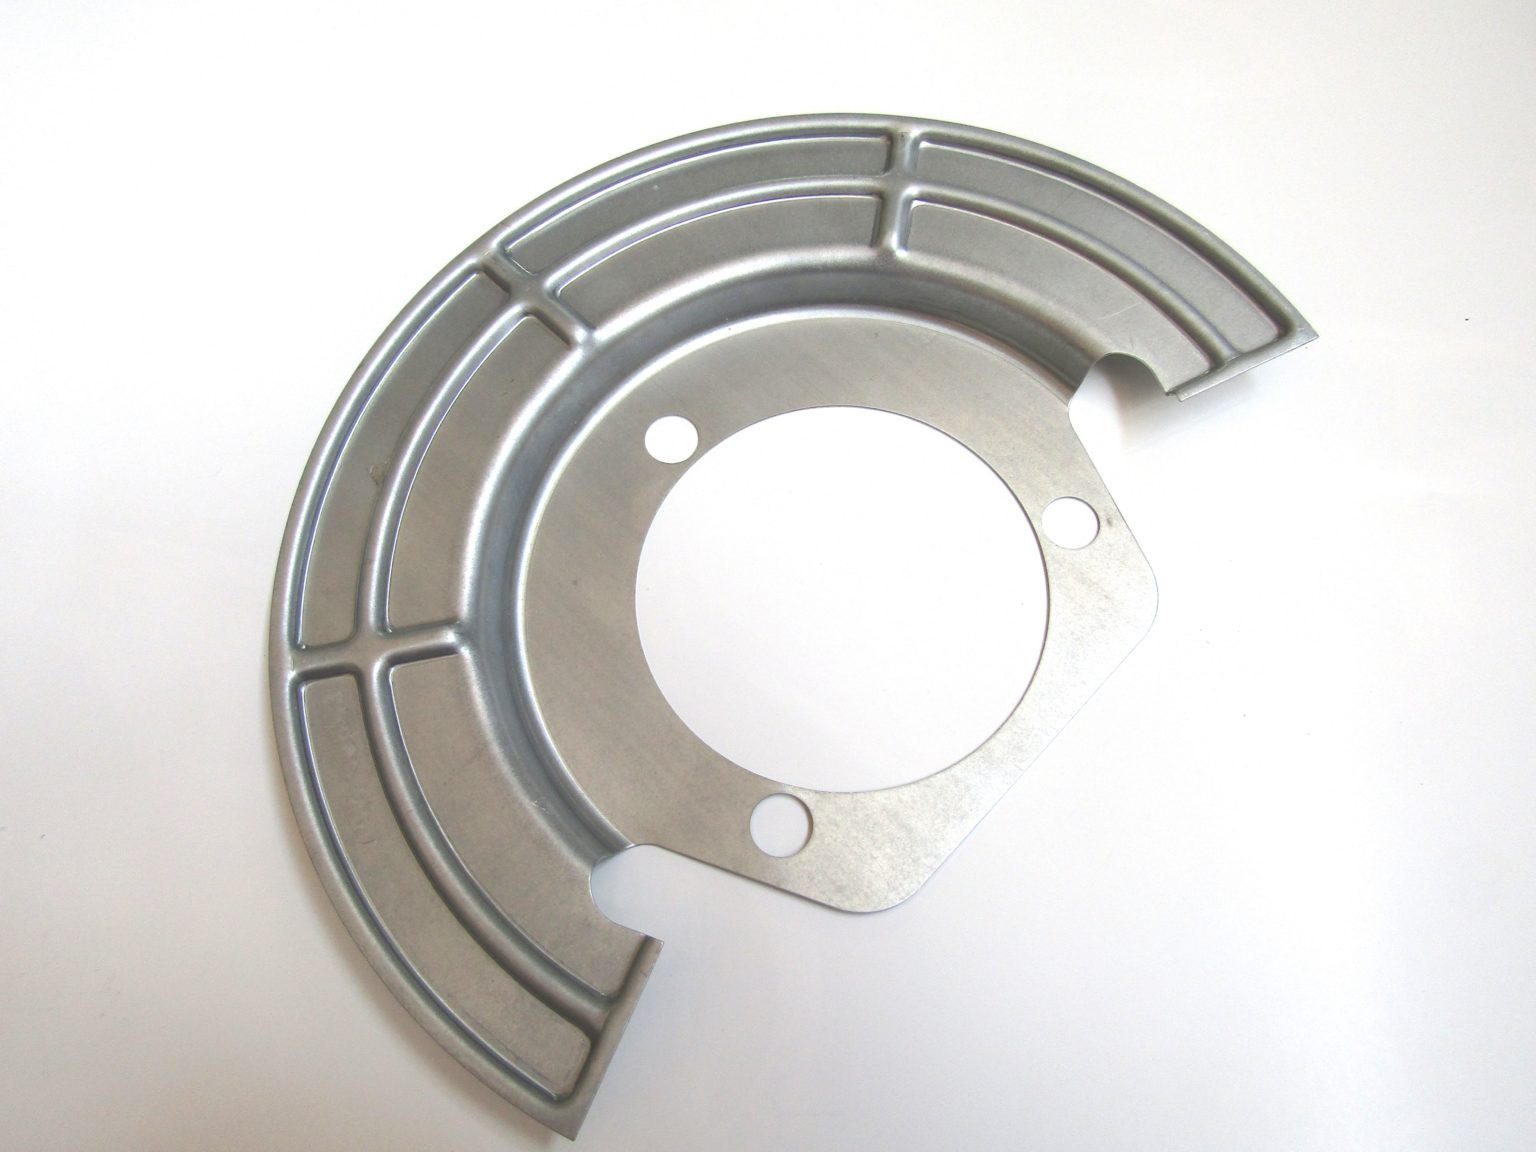 chevy front license plate bracket